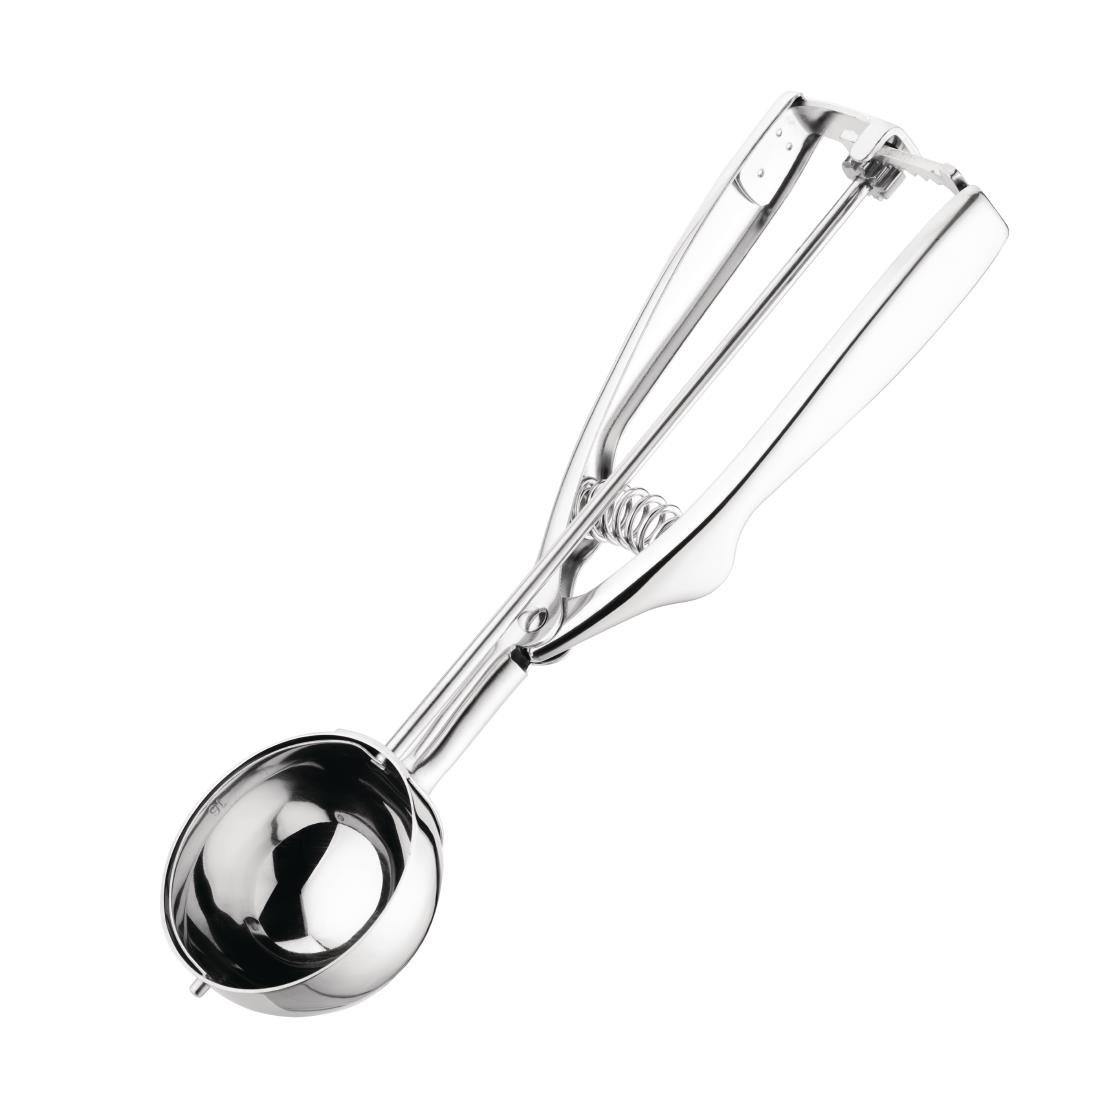 Stainless Steel Ice Scoop Size 16